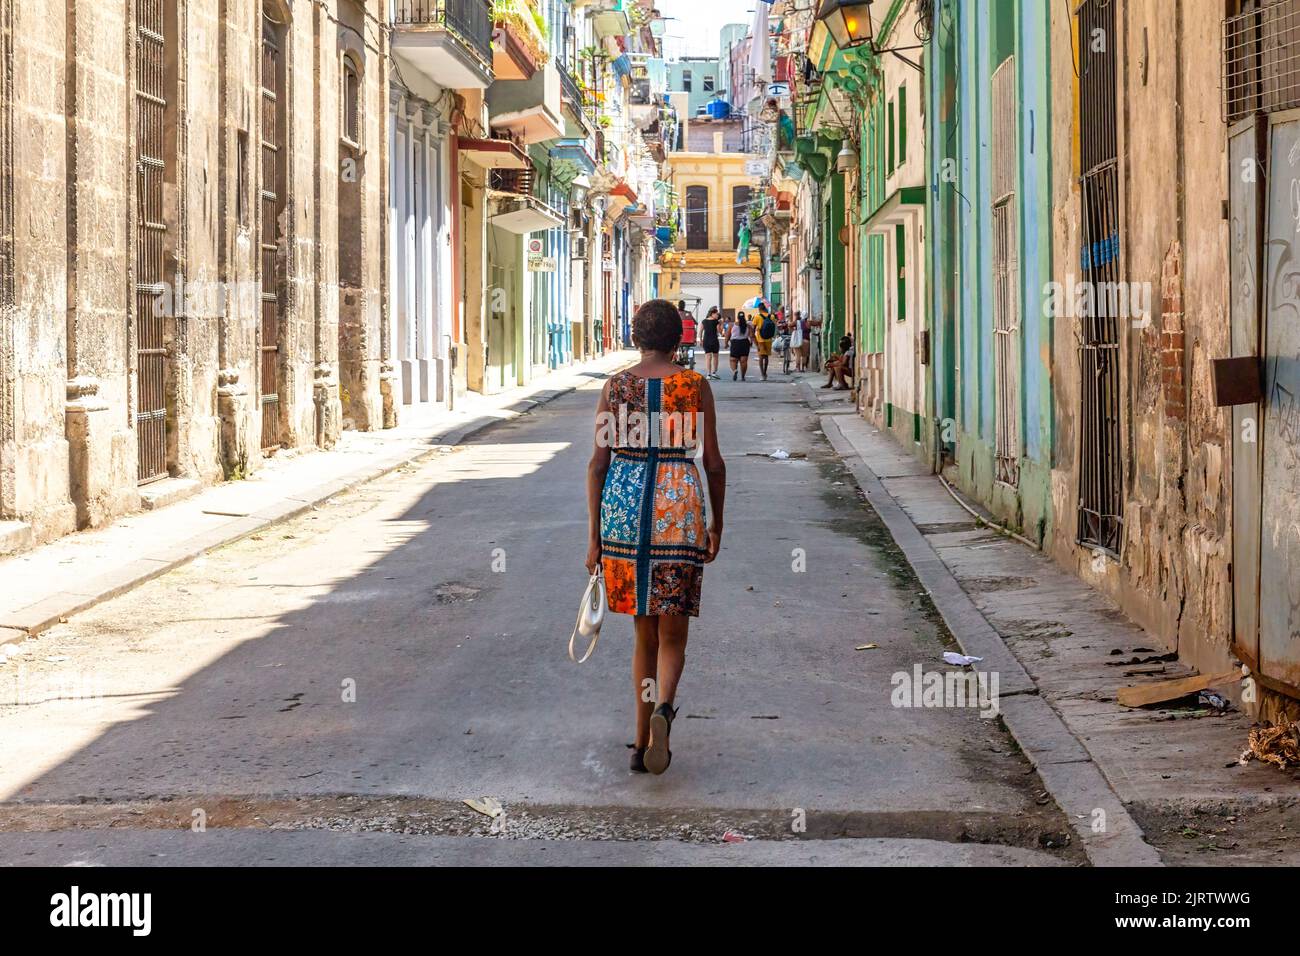 A Cuban Afro-Caribbean woman walks in a city street where a weathered facade of buildings is lined up. The street is with holes and the sidewalk is dir Stock Photo